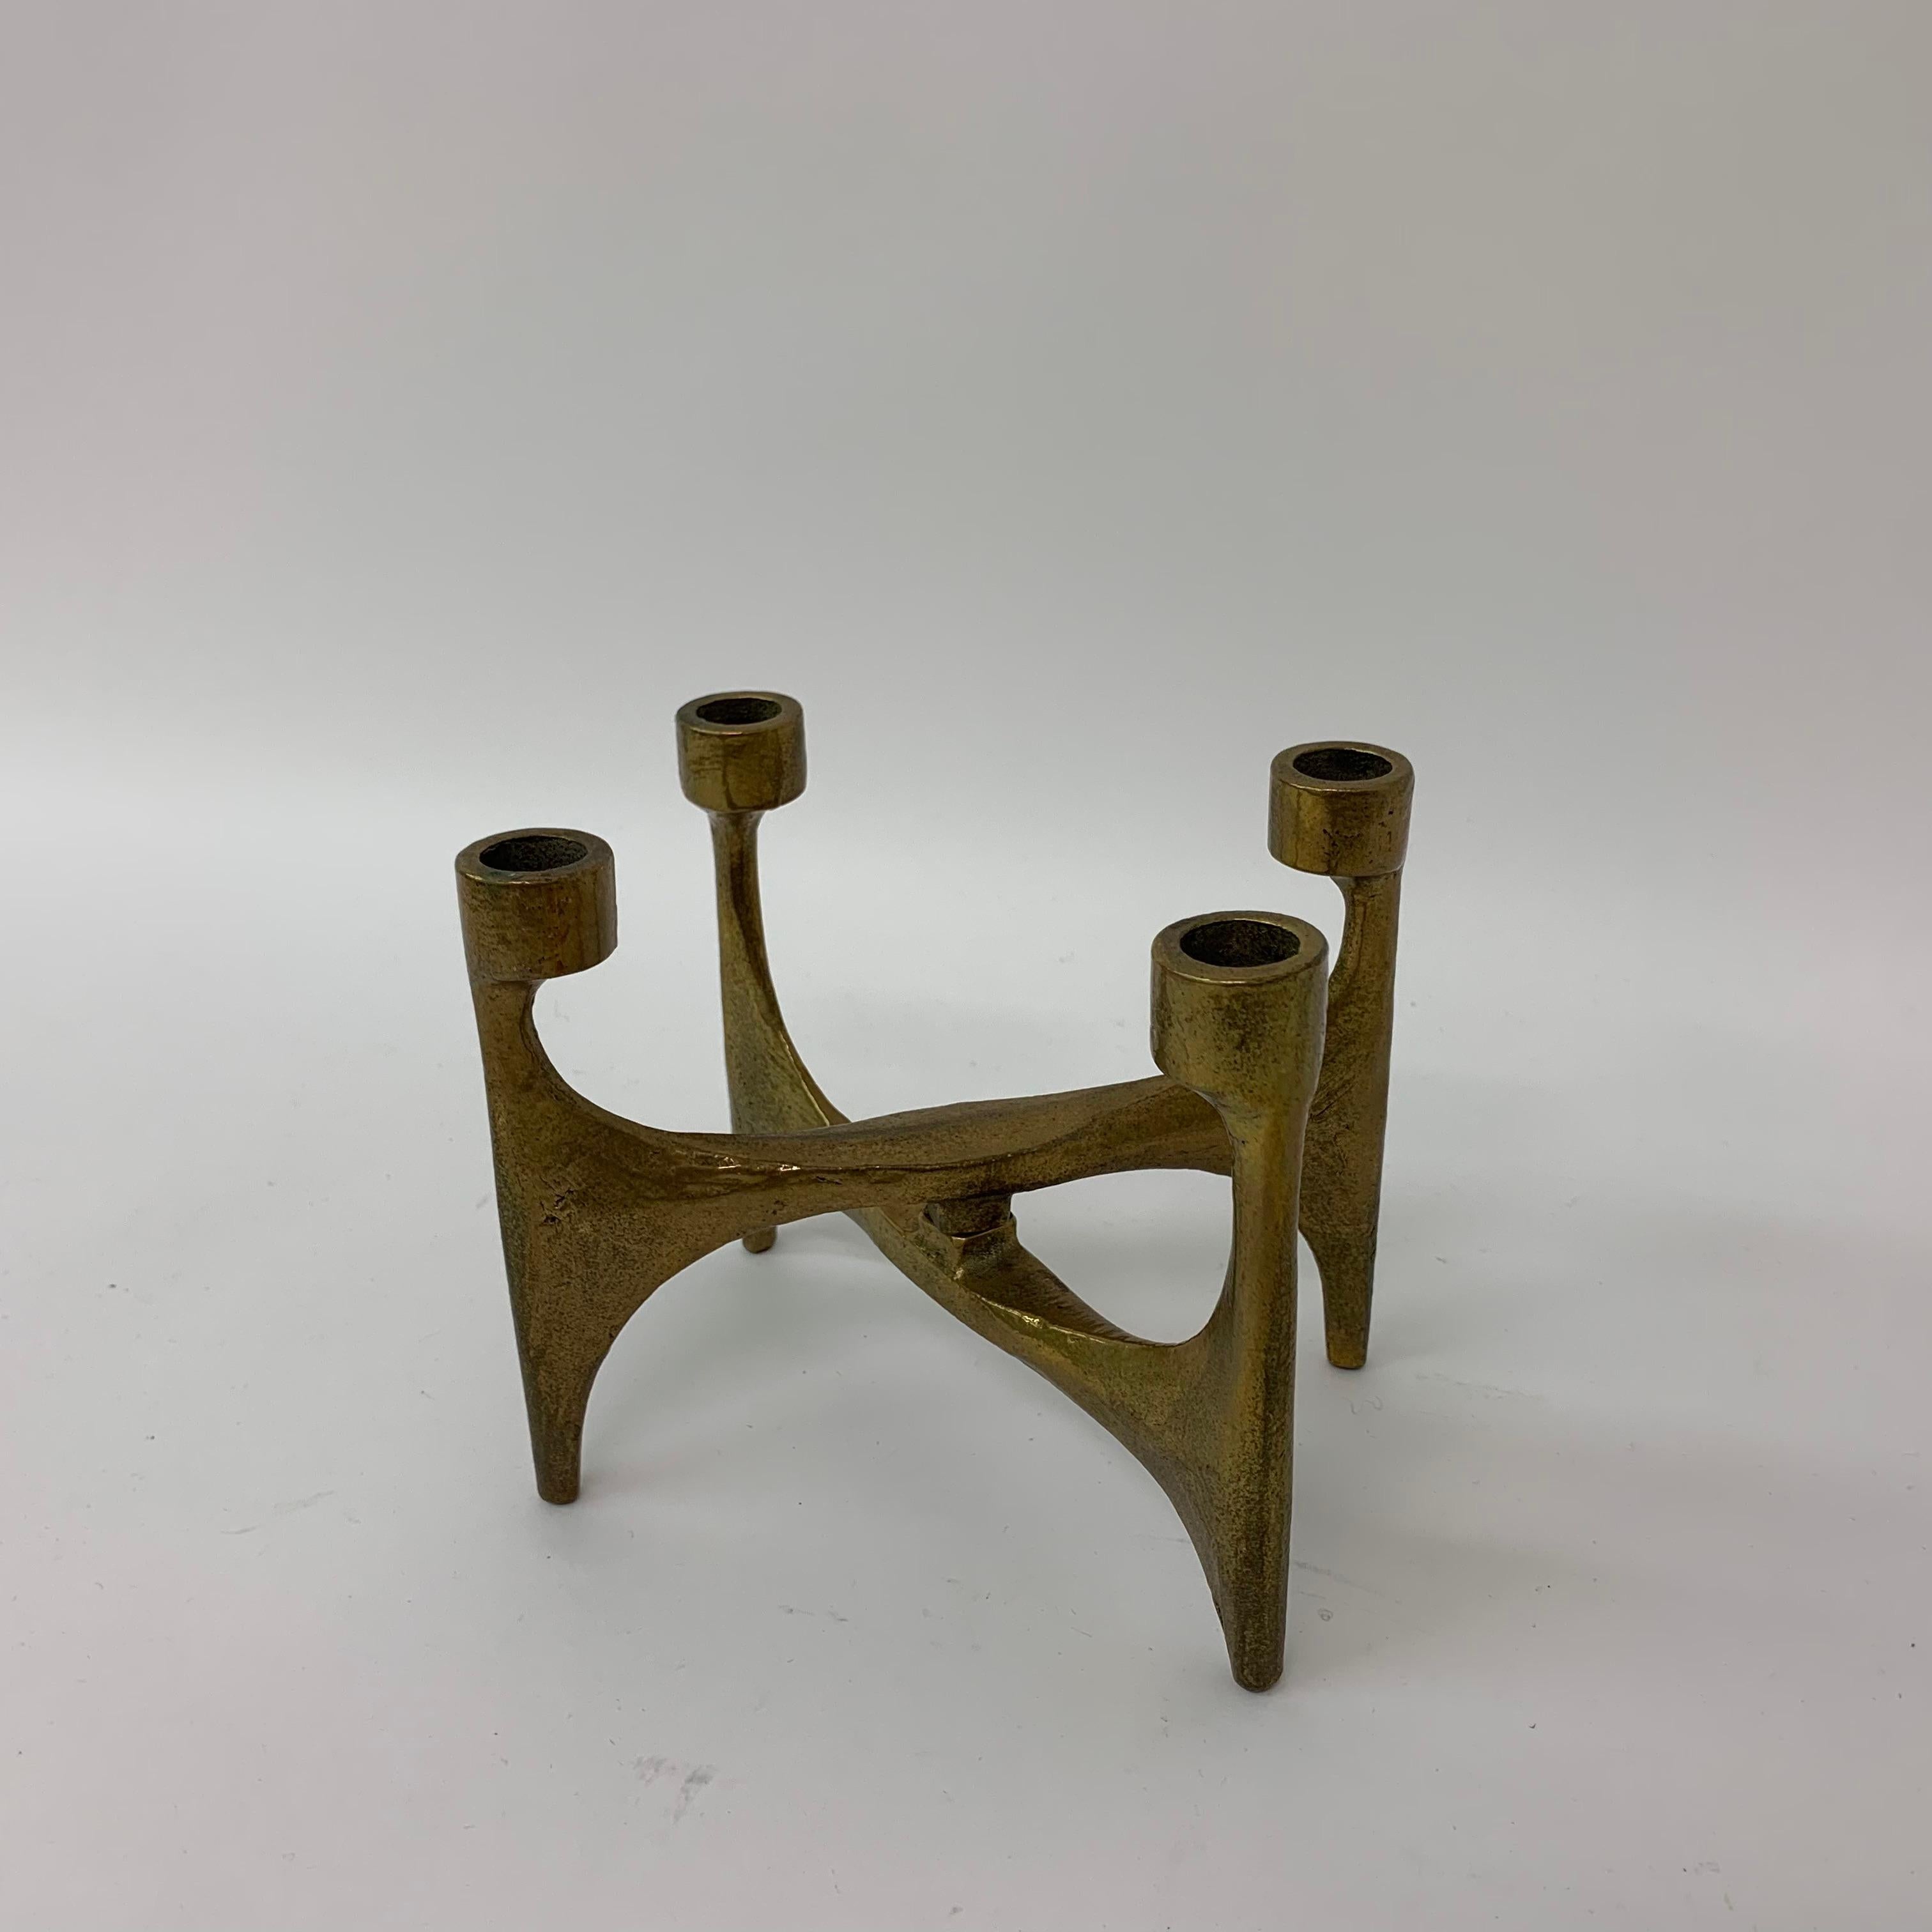 Brutalist Bronze Candle Stick, 1970’s For Sale 7